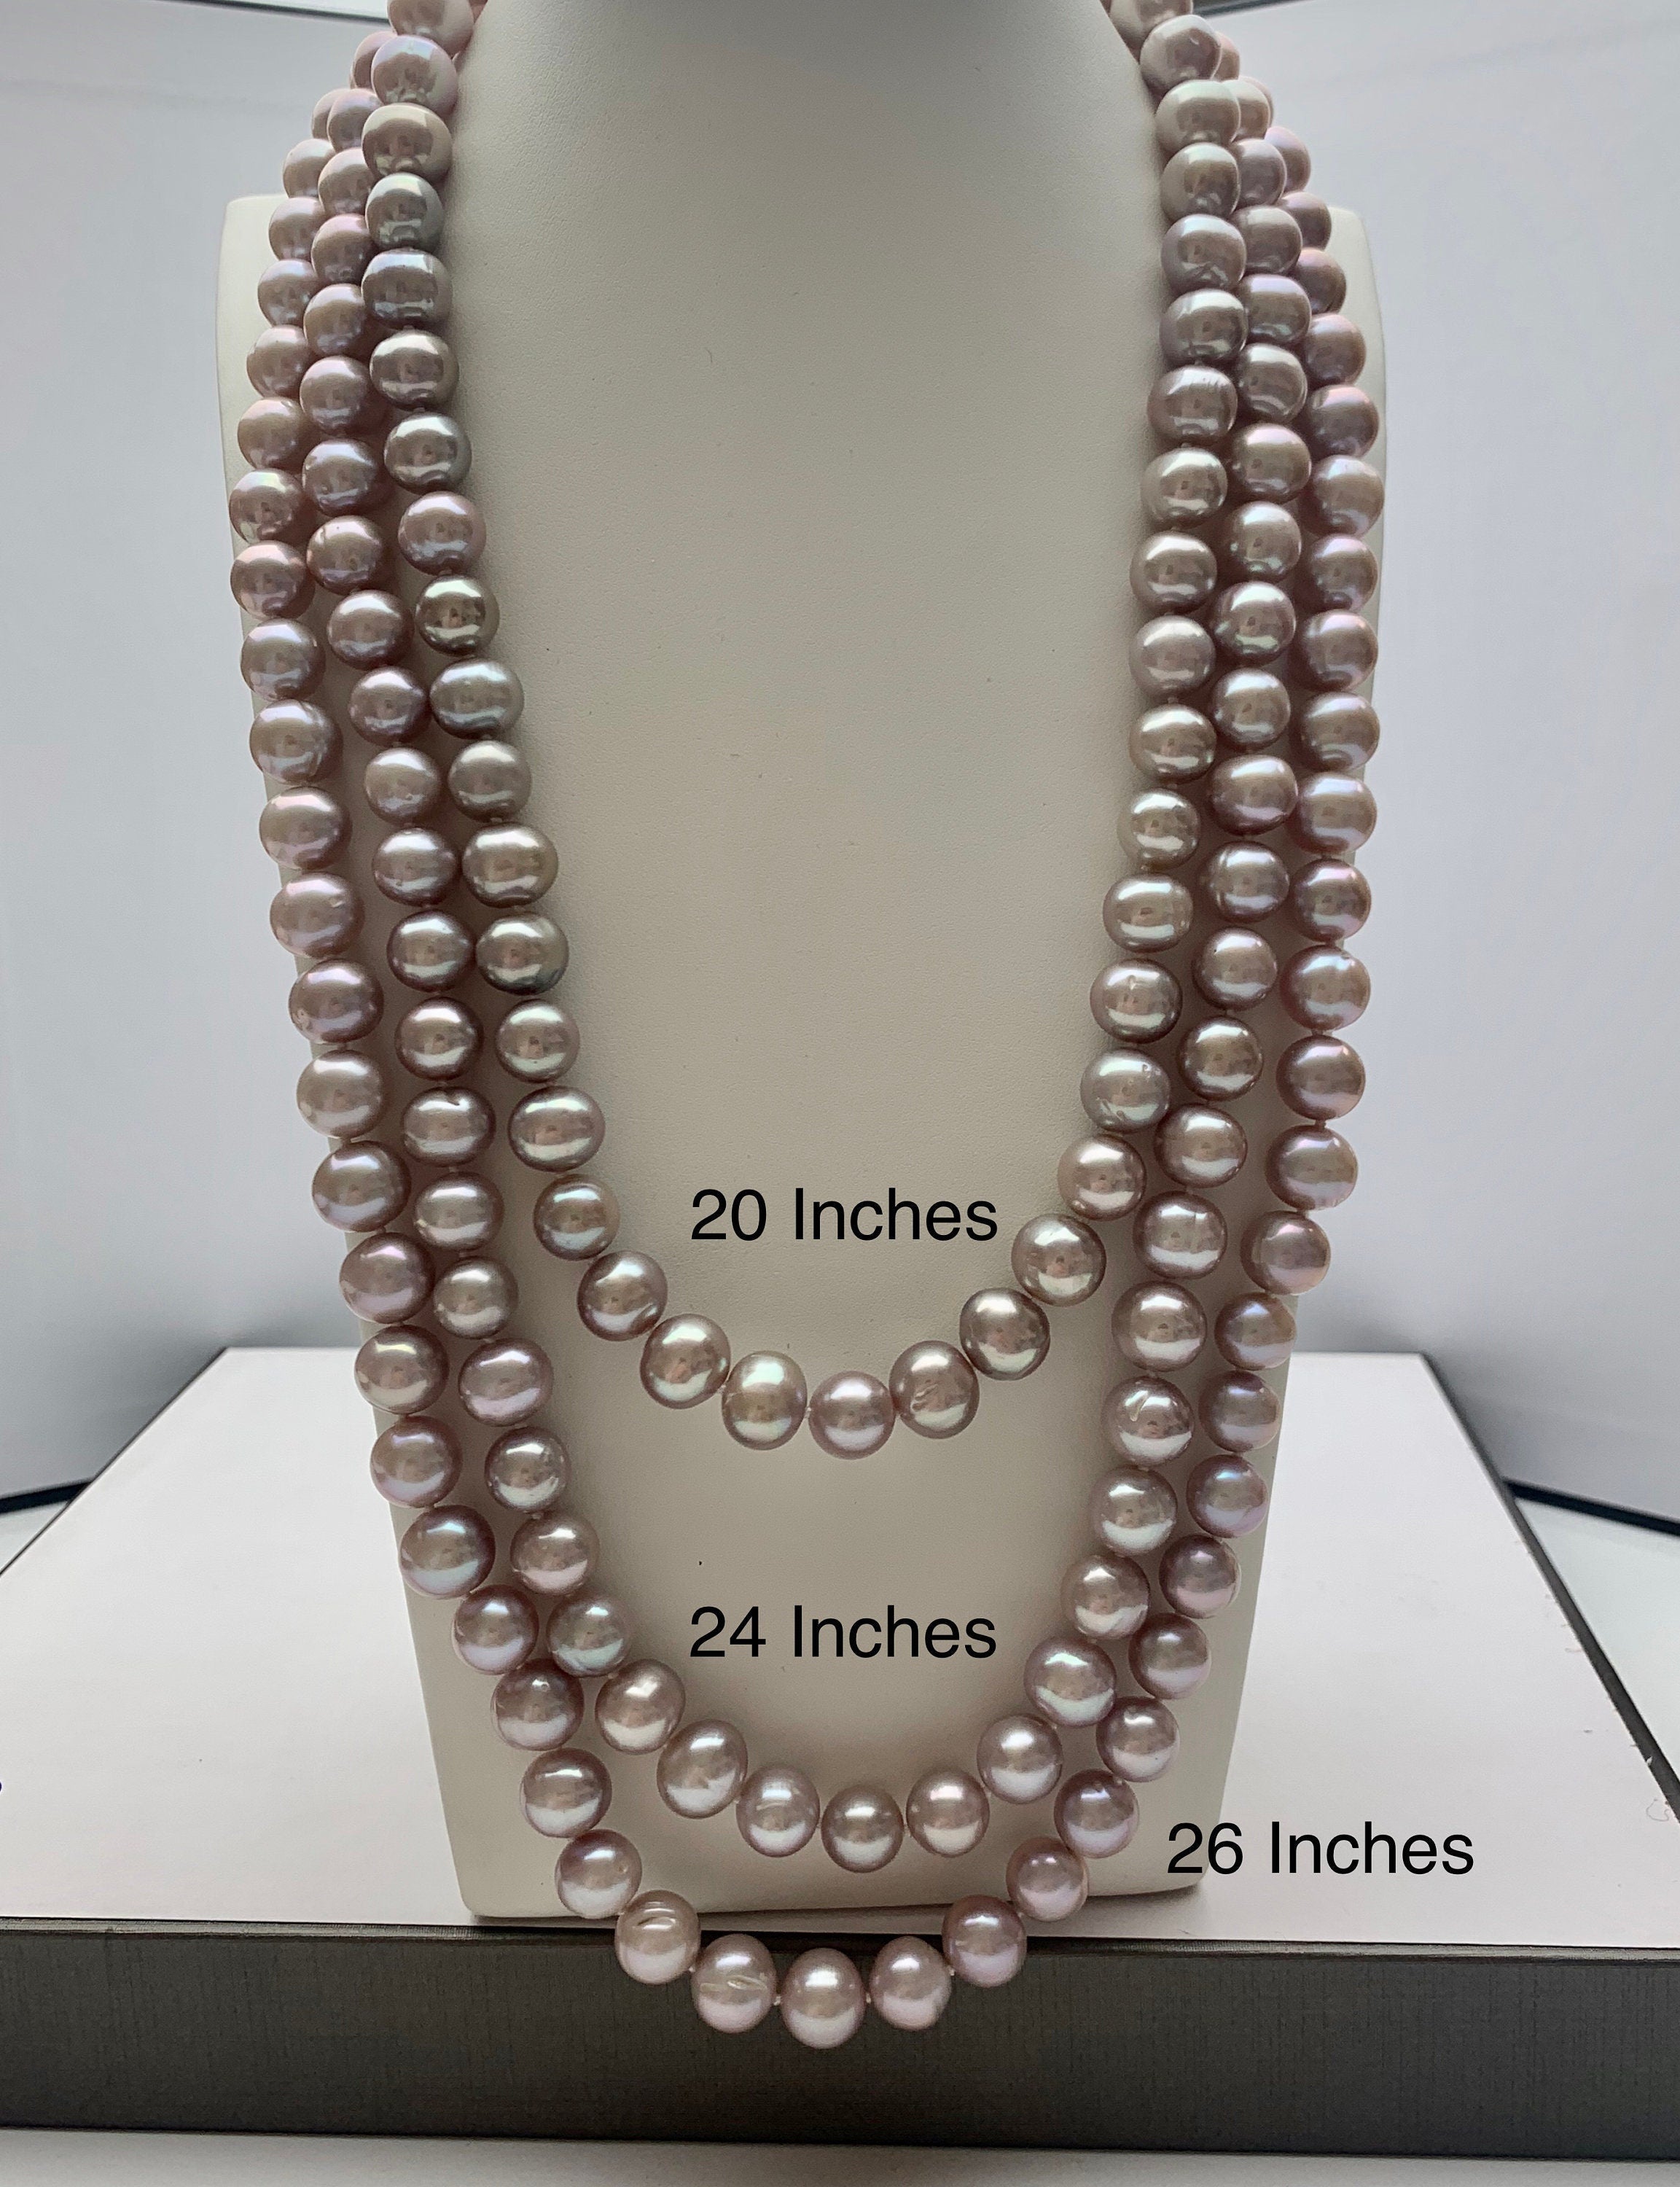 7 - 8 mm Round White Freshwater Pearls – The Bead Shop